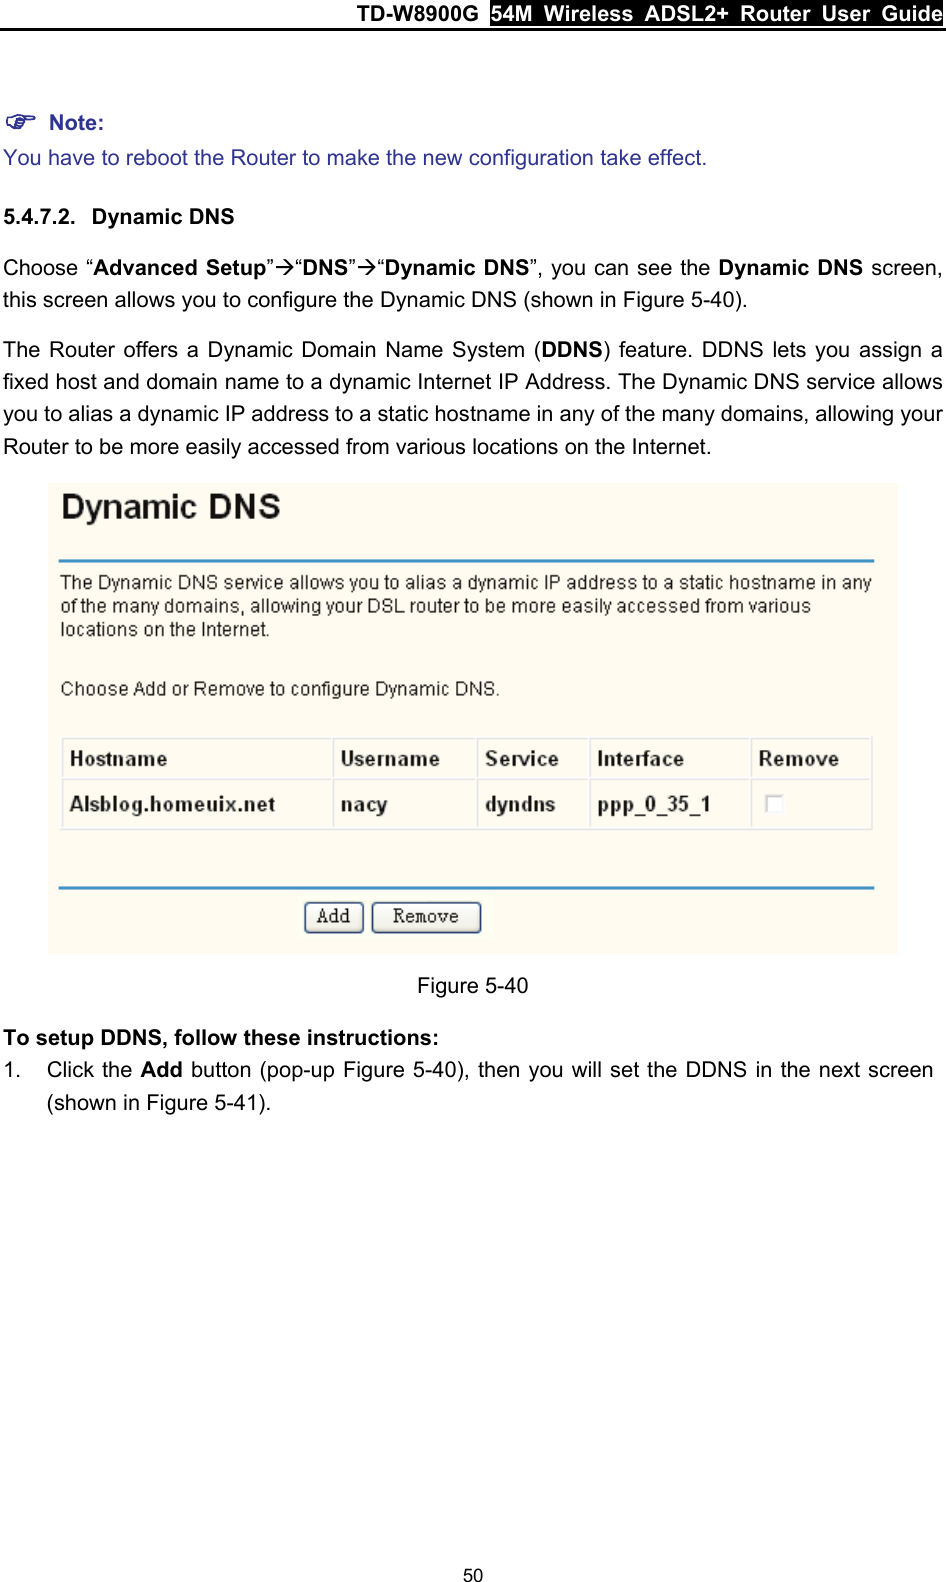 TD-W8900G  54M Wireless ADSL2+ Router User Guide 50  ) Note: You have to reboot the Router to make the new configuration take effect. 5.4.7.2.  Dynamic DNS Choose “Advanced Setup”Æ“DNS”Æ“Dynamic DNS”, you can see the Dynamic DNS screen, this screen allows you to configure the Dynamic DNS (shown in Figure 5-40). The Router offers a Dynamic Domain Name System (DDNS) feature. DDNS lets you assign a fixed host and domain name to a dynamic Internet IP Address. The Dynamic DNS service allows you to alias a dynamic IP address to a static hostname in any of the many domains, allowing your Router to be more easily accessed from various locations on the Internet.  Figure 5-40 To setup DDNS, follow these instructions: 1. Click the Add button (pop-up Figure 5-40), then you will set the DDNS in the next screen (shown in Figure 5-41). 